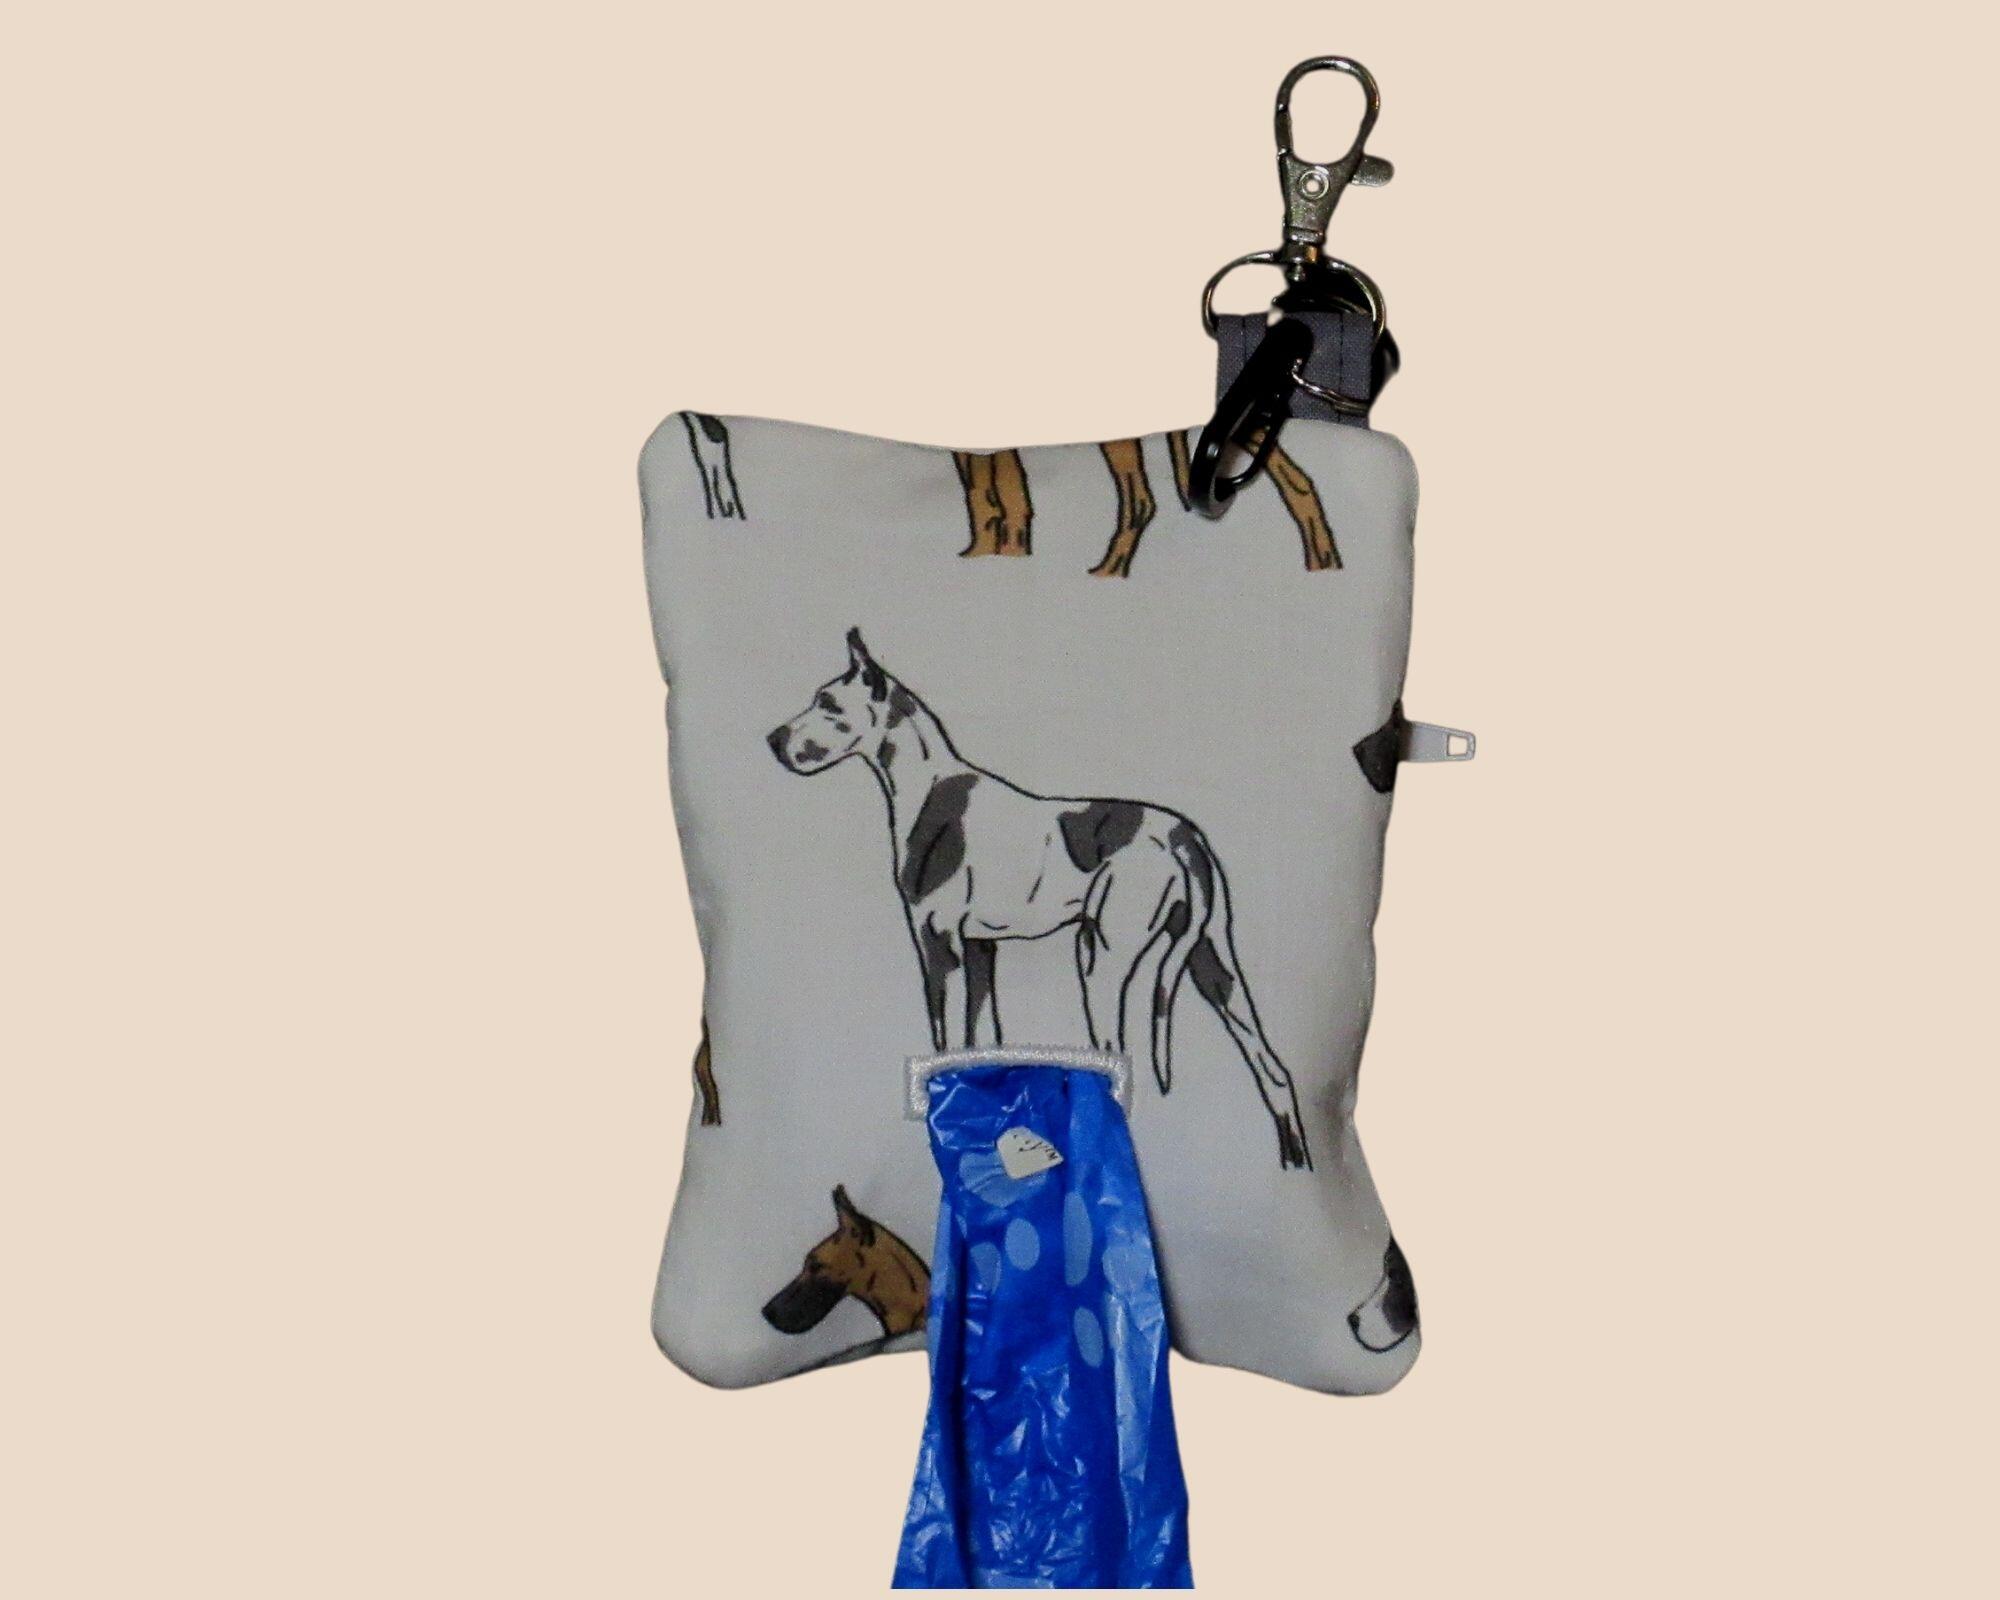 Know someone with a Great Dane?  They will need a Dog Poop Bag Holder.

A little larger than the standard dispenser - can hold a roll of big bags.
Showcases the various Dane shadings and is lined in quilt cotton.  Open with a zipper and clip to the leash.